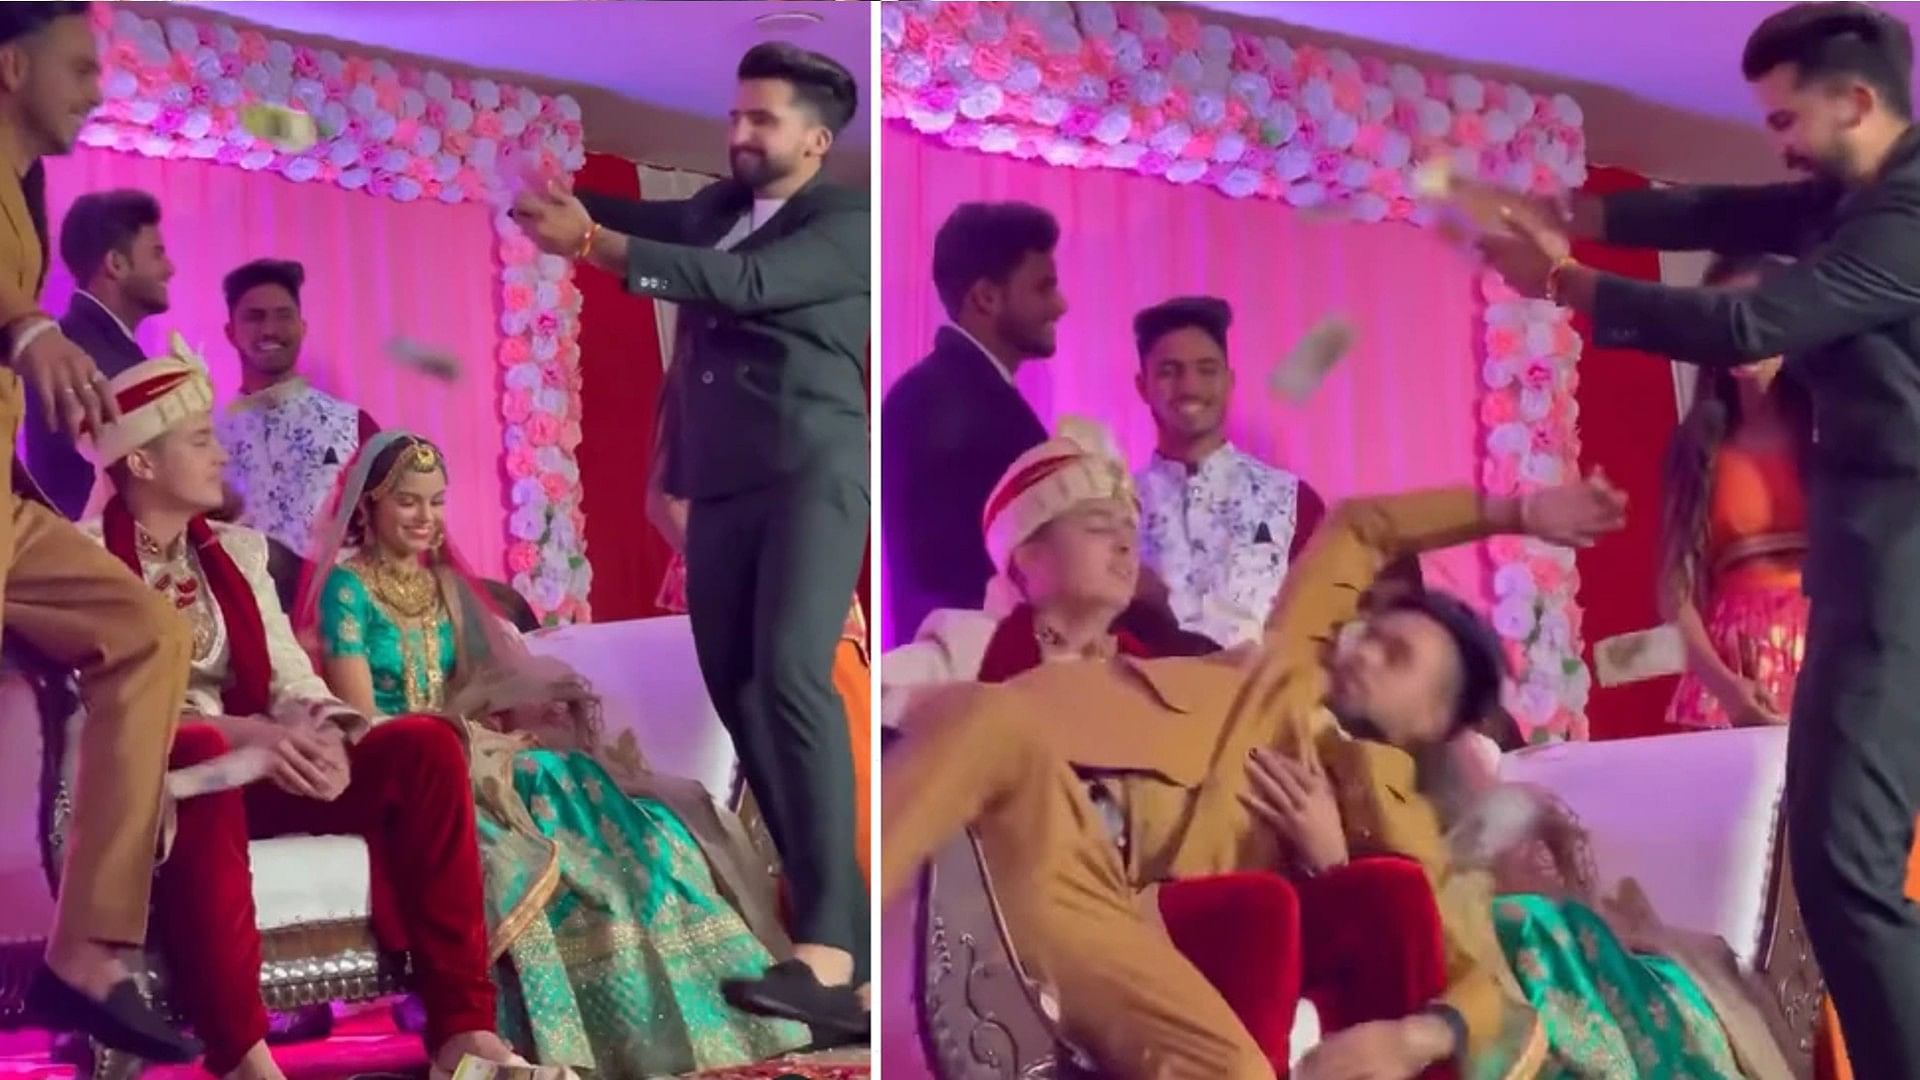 Wedding Video friends did such an act in front of the bride on stage groom became angry